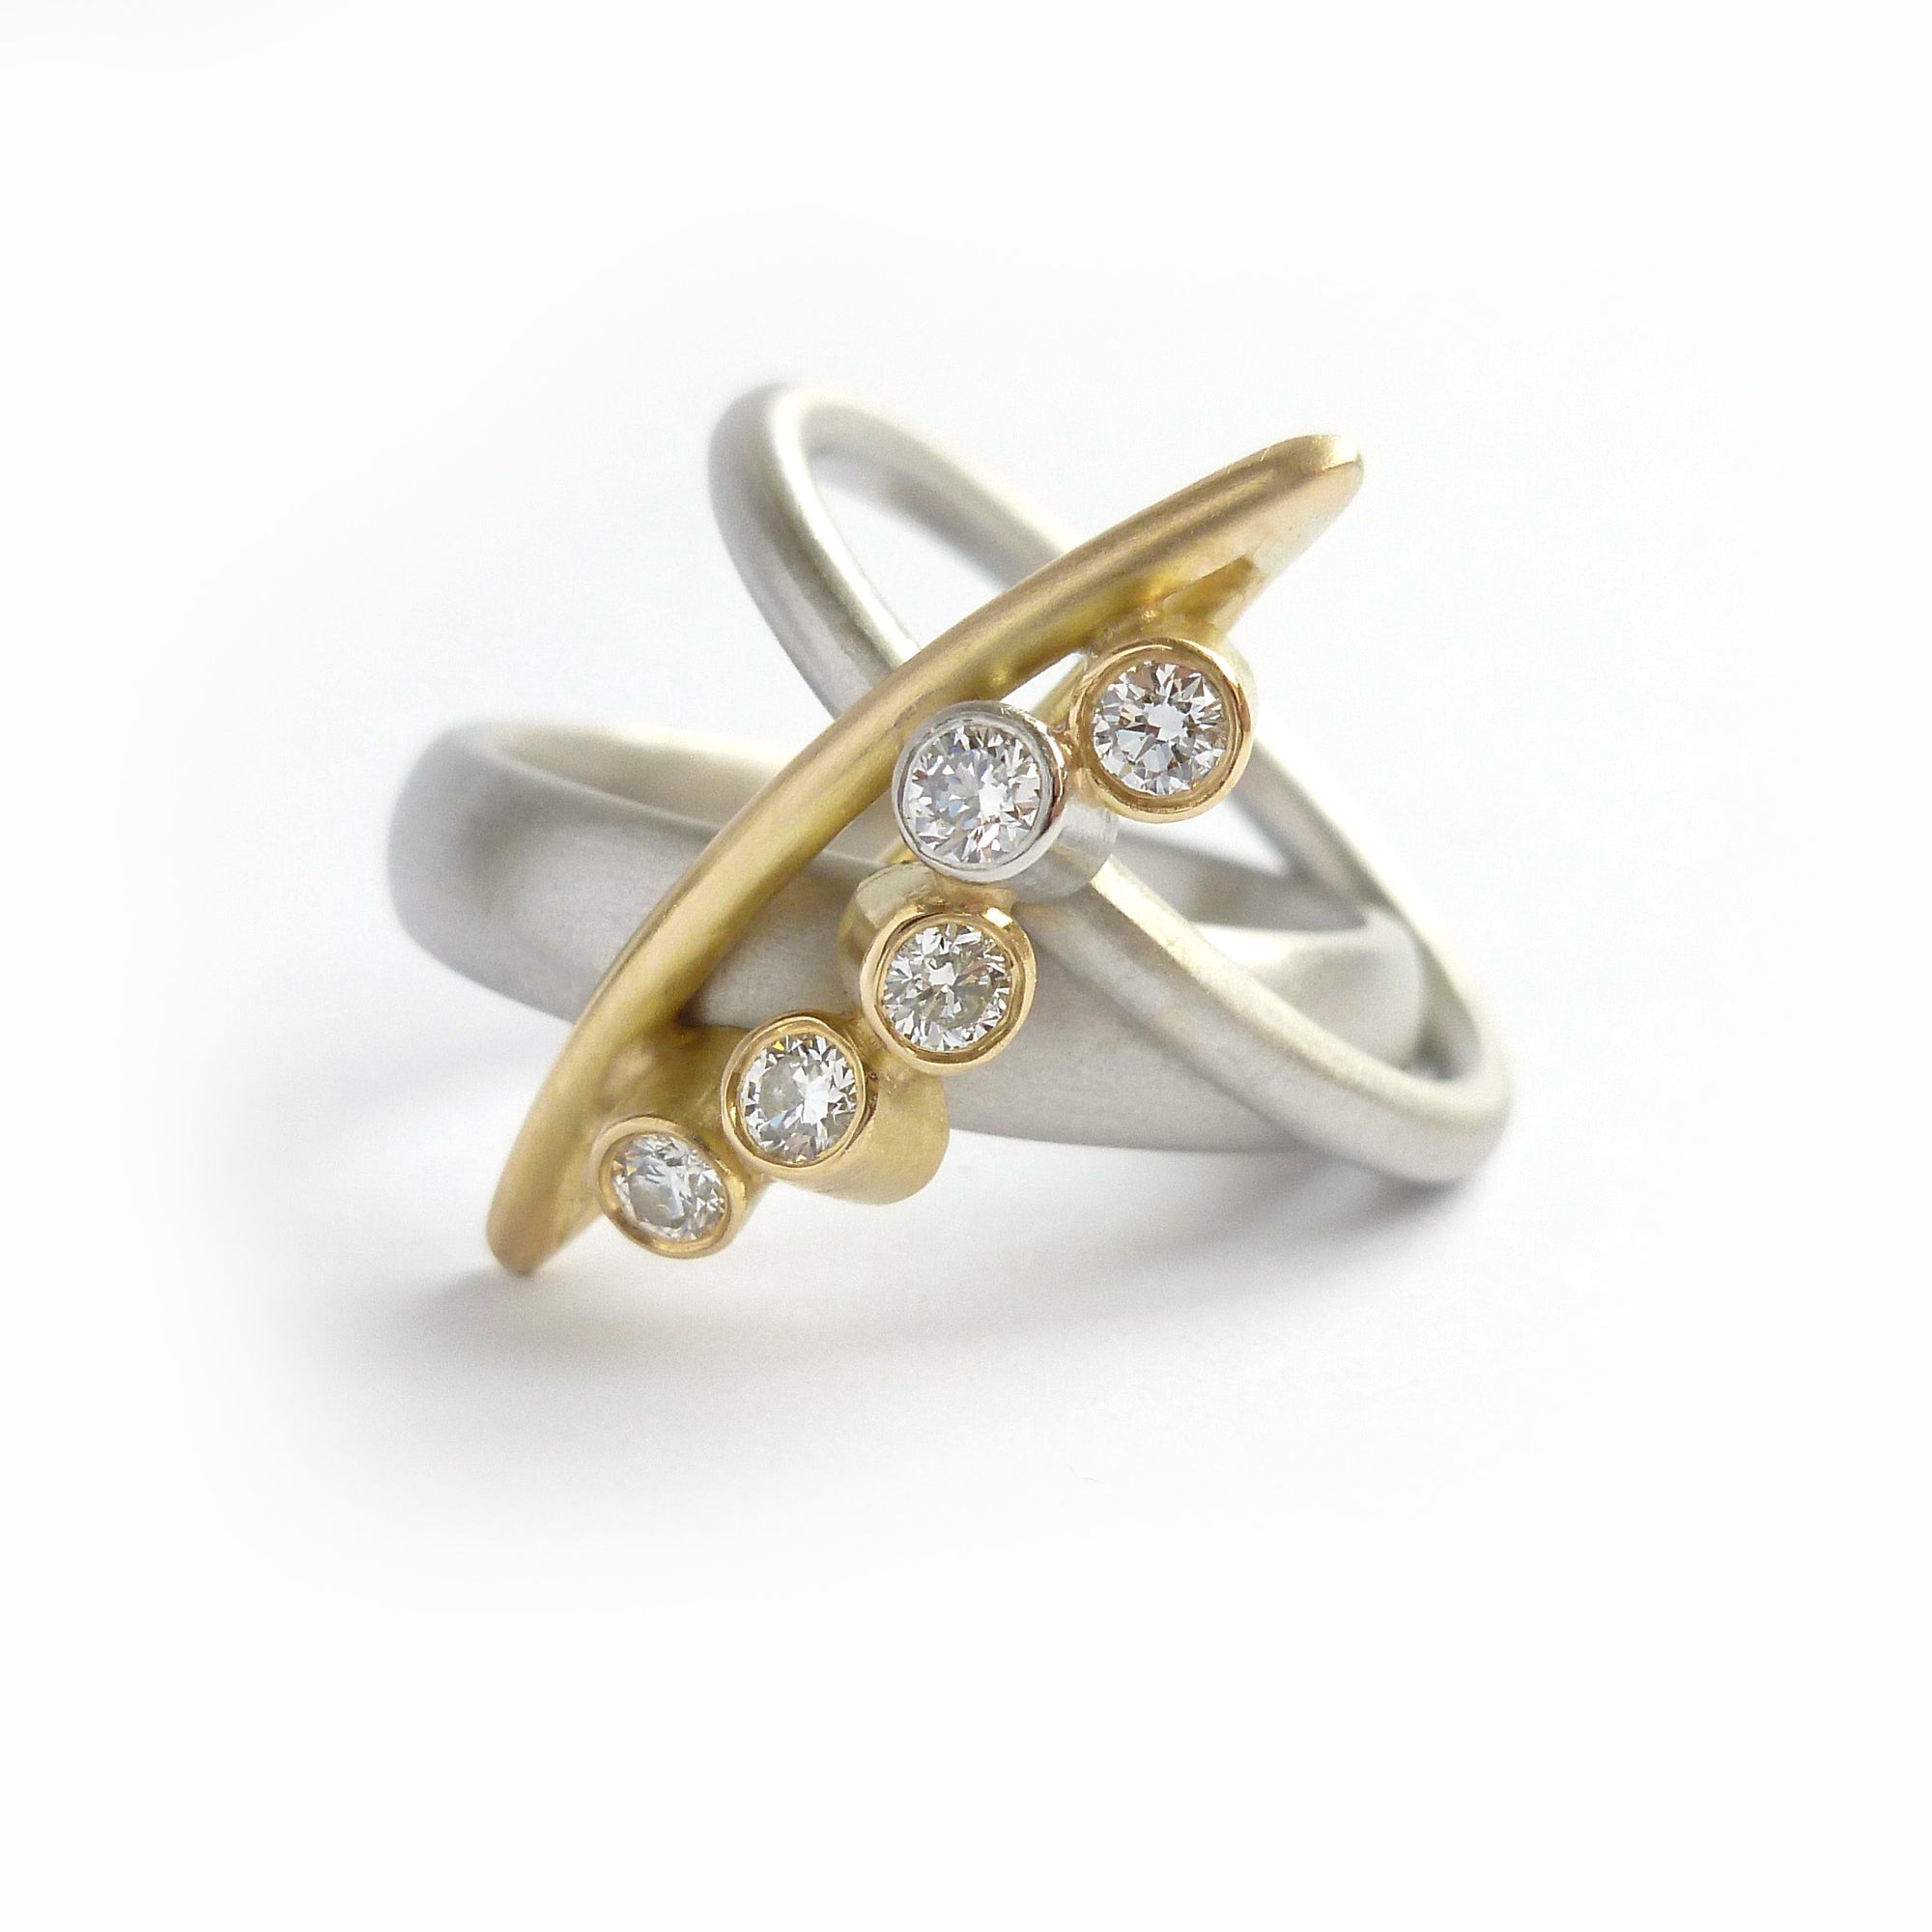 bespoke modern platinum and gold dress ring with diamonds by UK designer and maker Sue Lane 